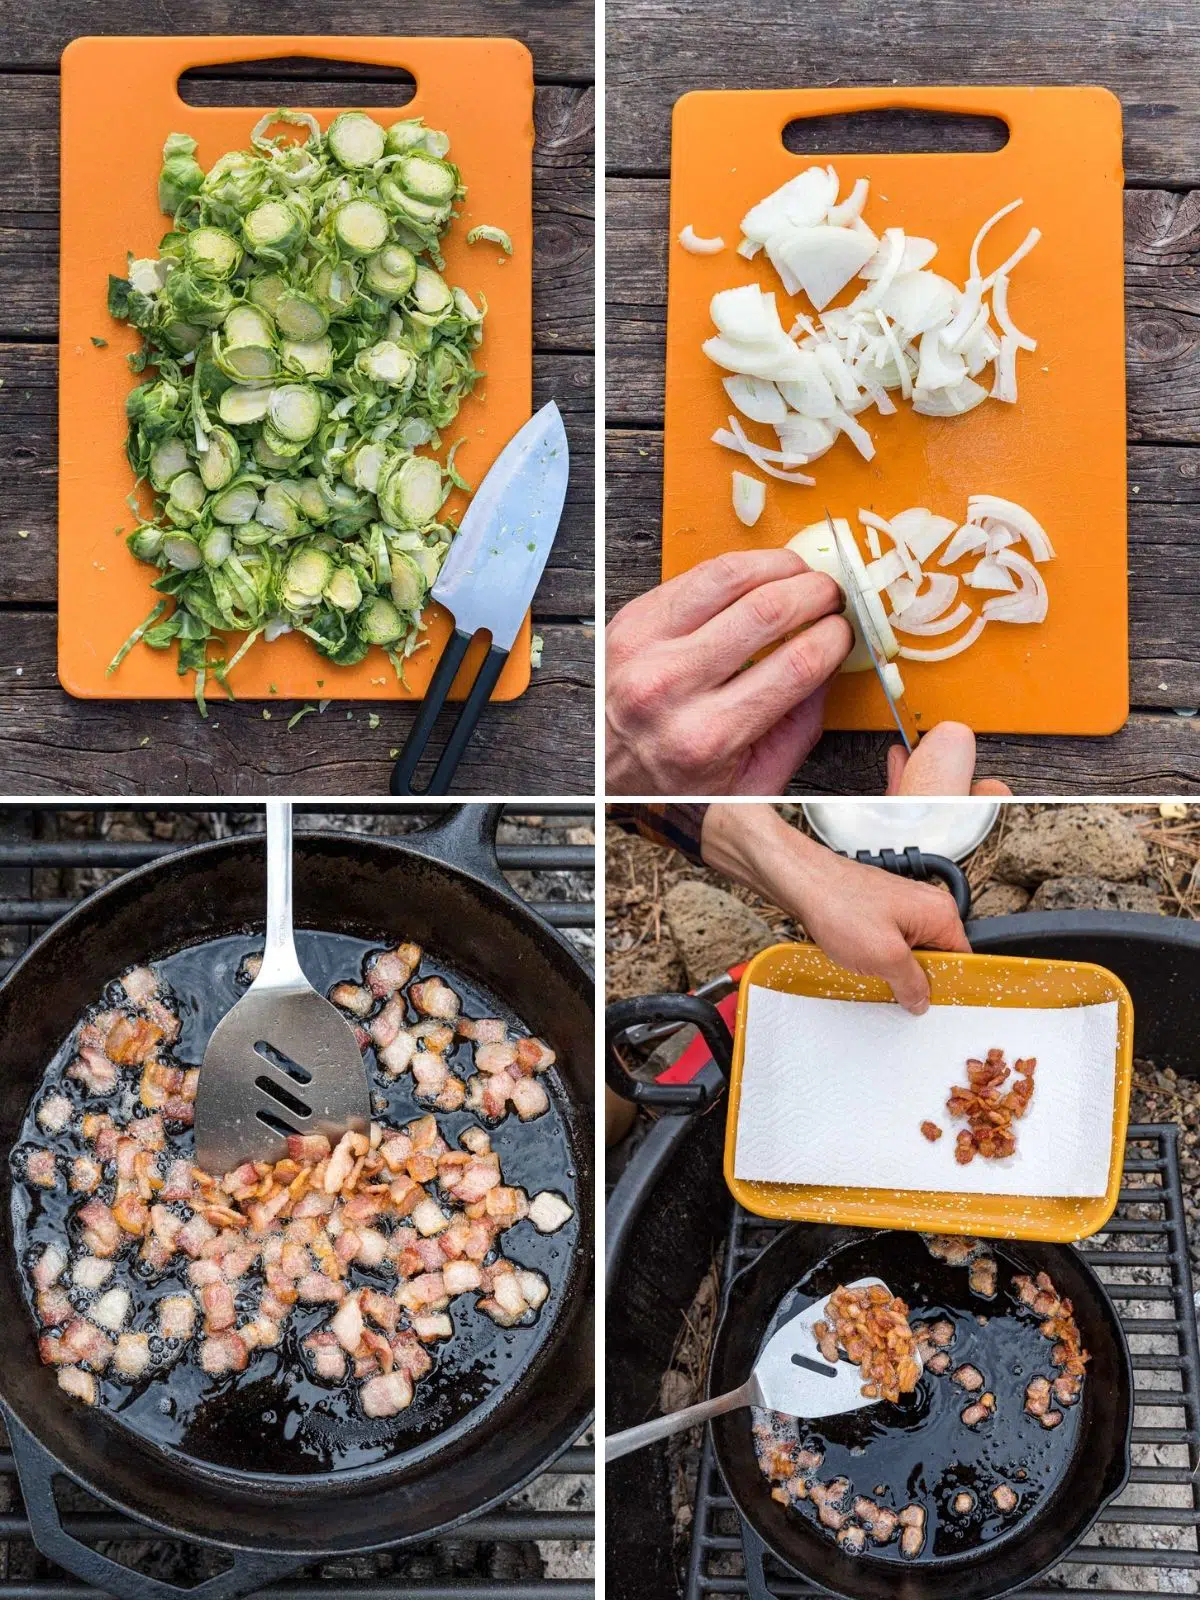 Brussels sprouts and bacon steps 1-4